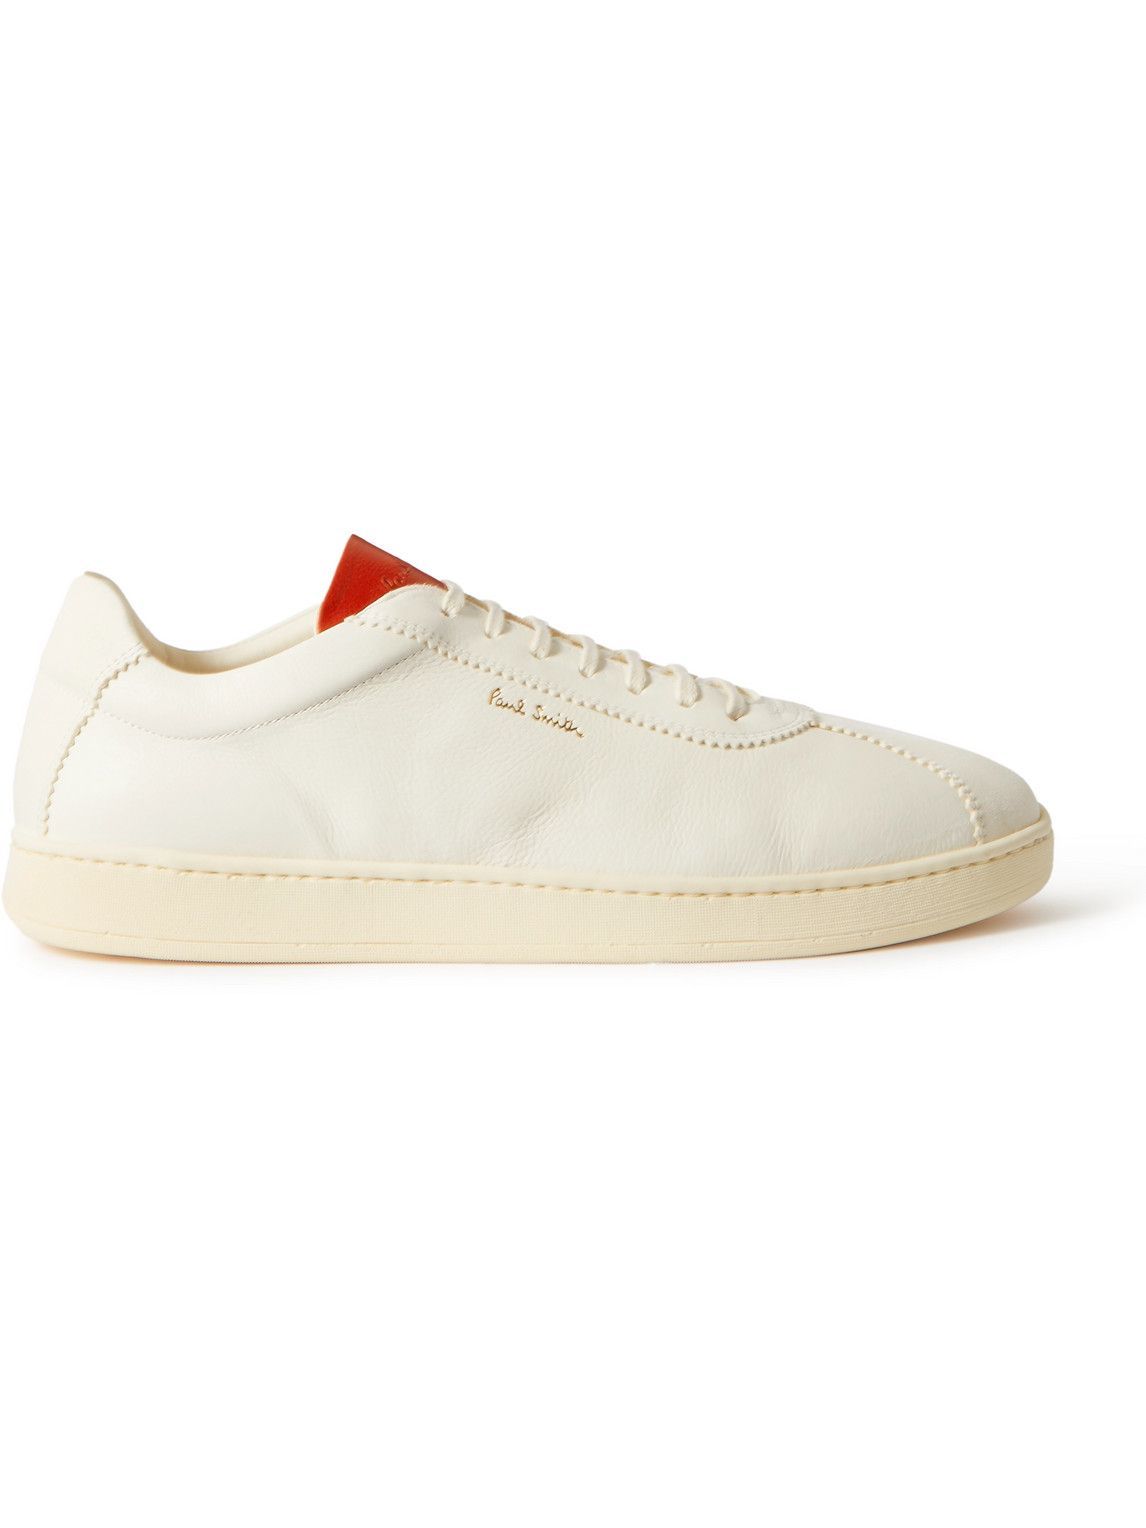 Paul Smith - Vantage Suede-Trimmed Leather Sneakers - Neutrals Paul Smith